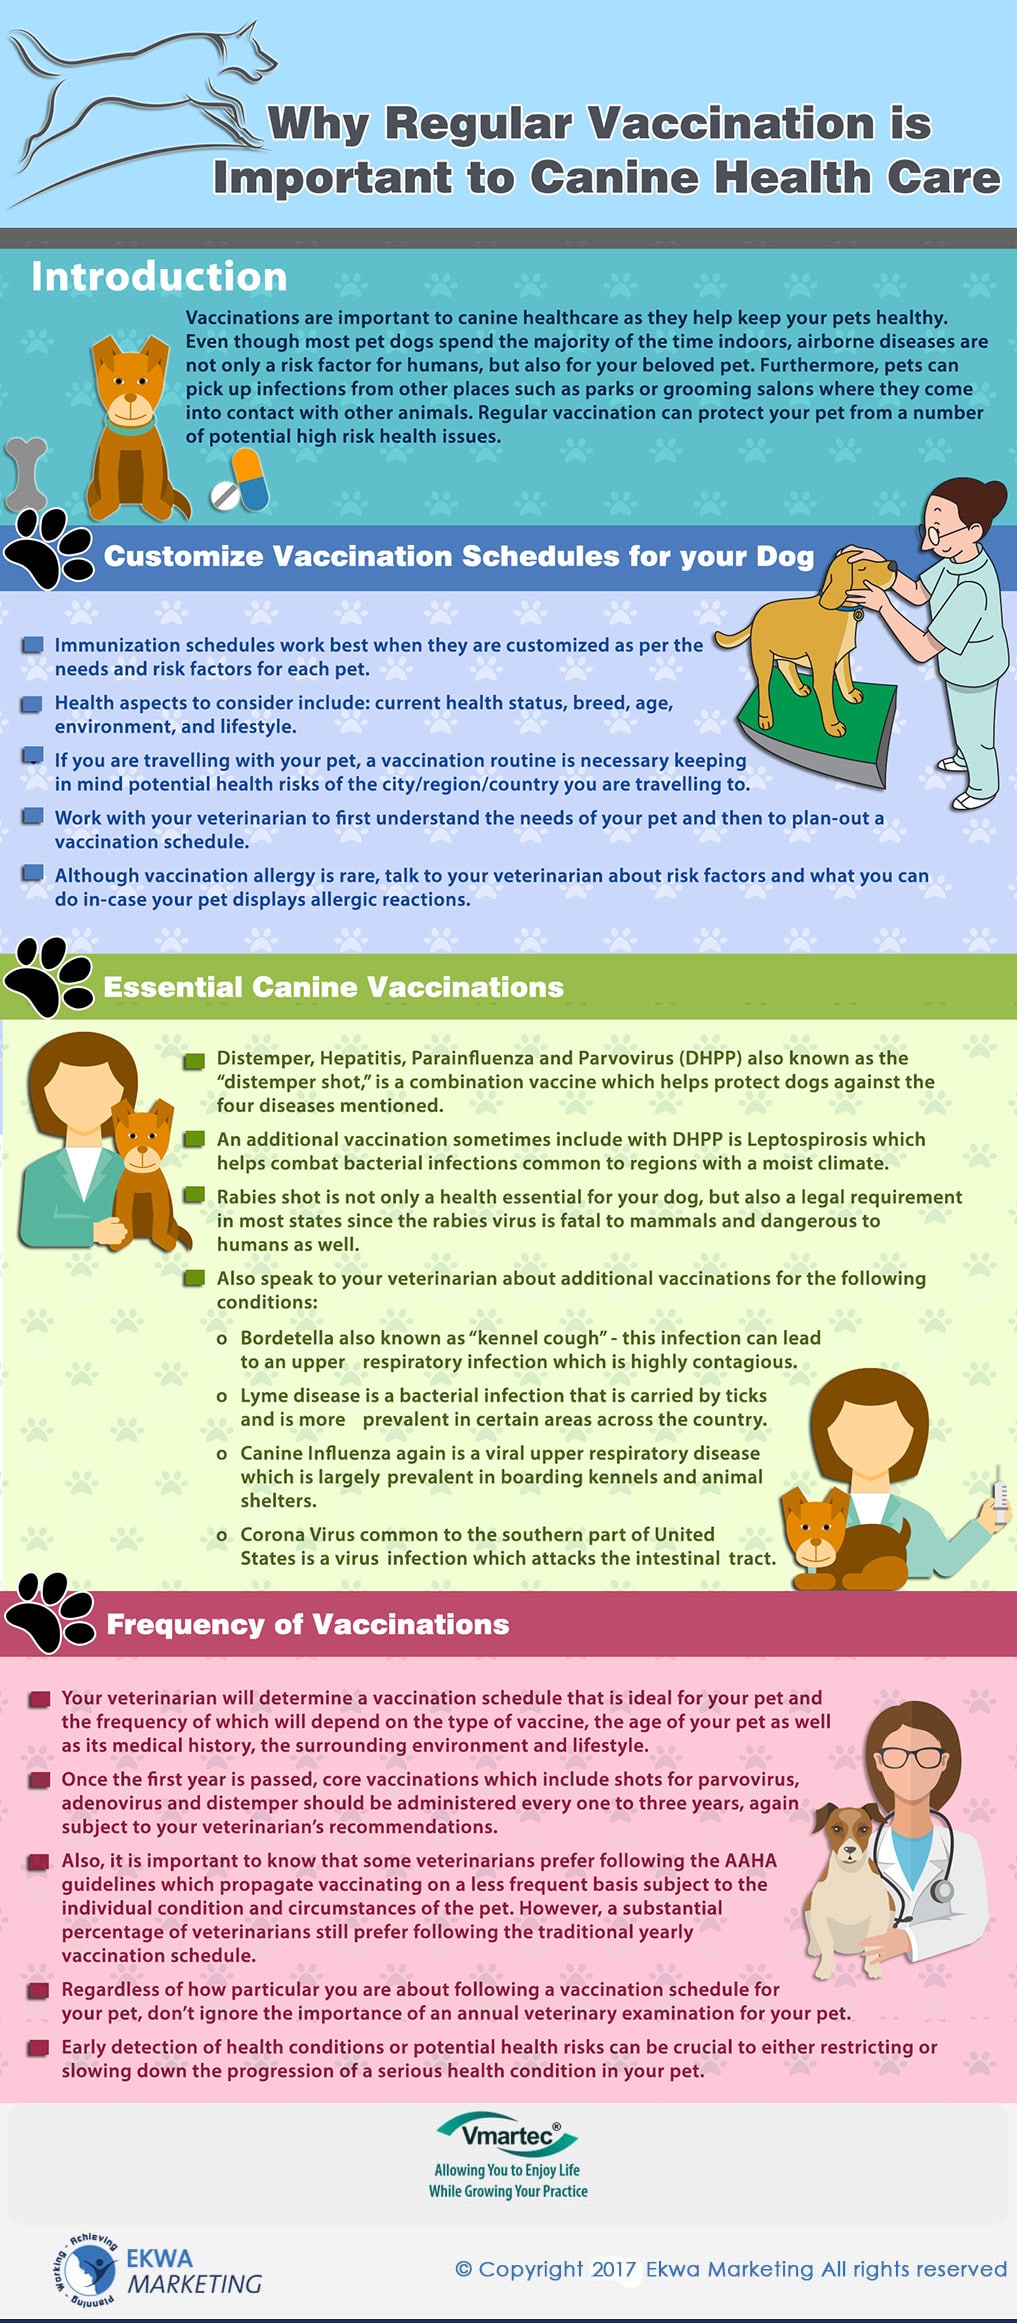 Vmartec, Why Regular Vaccination is Important to Canine Health Care